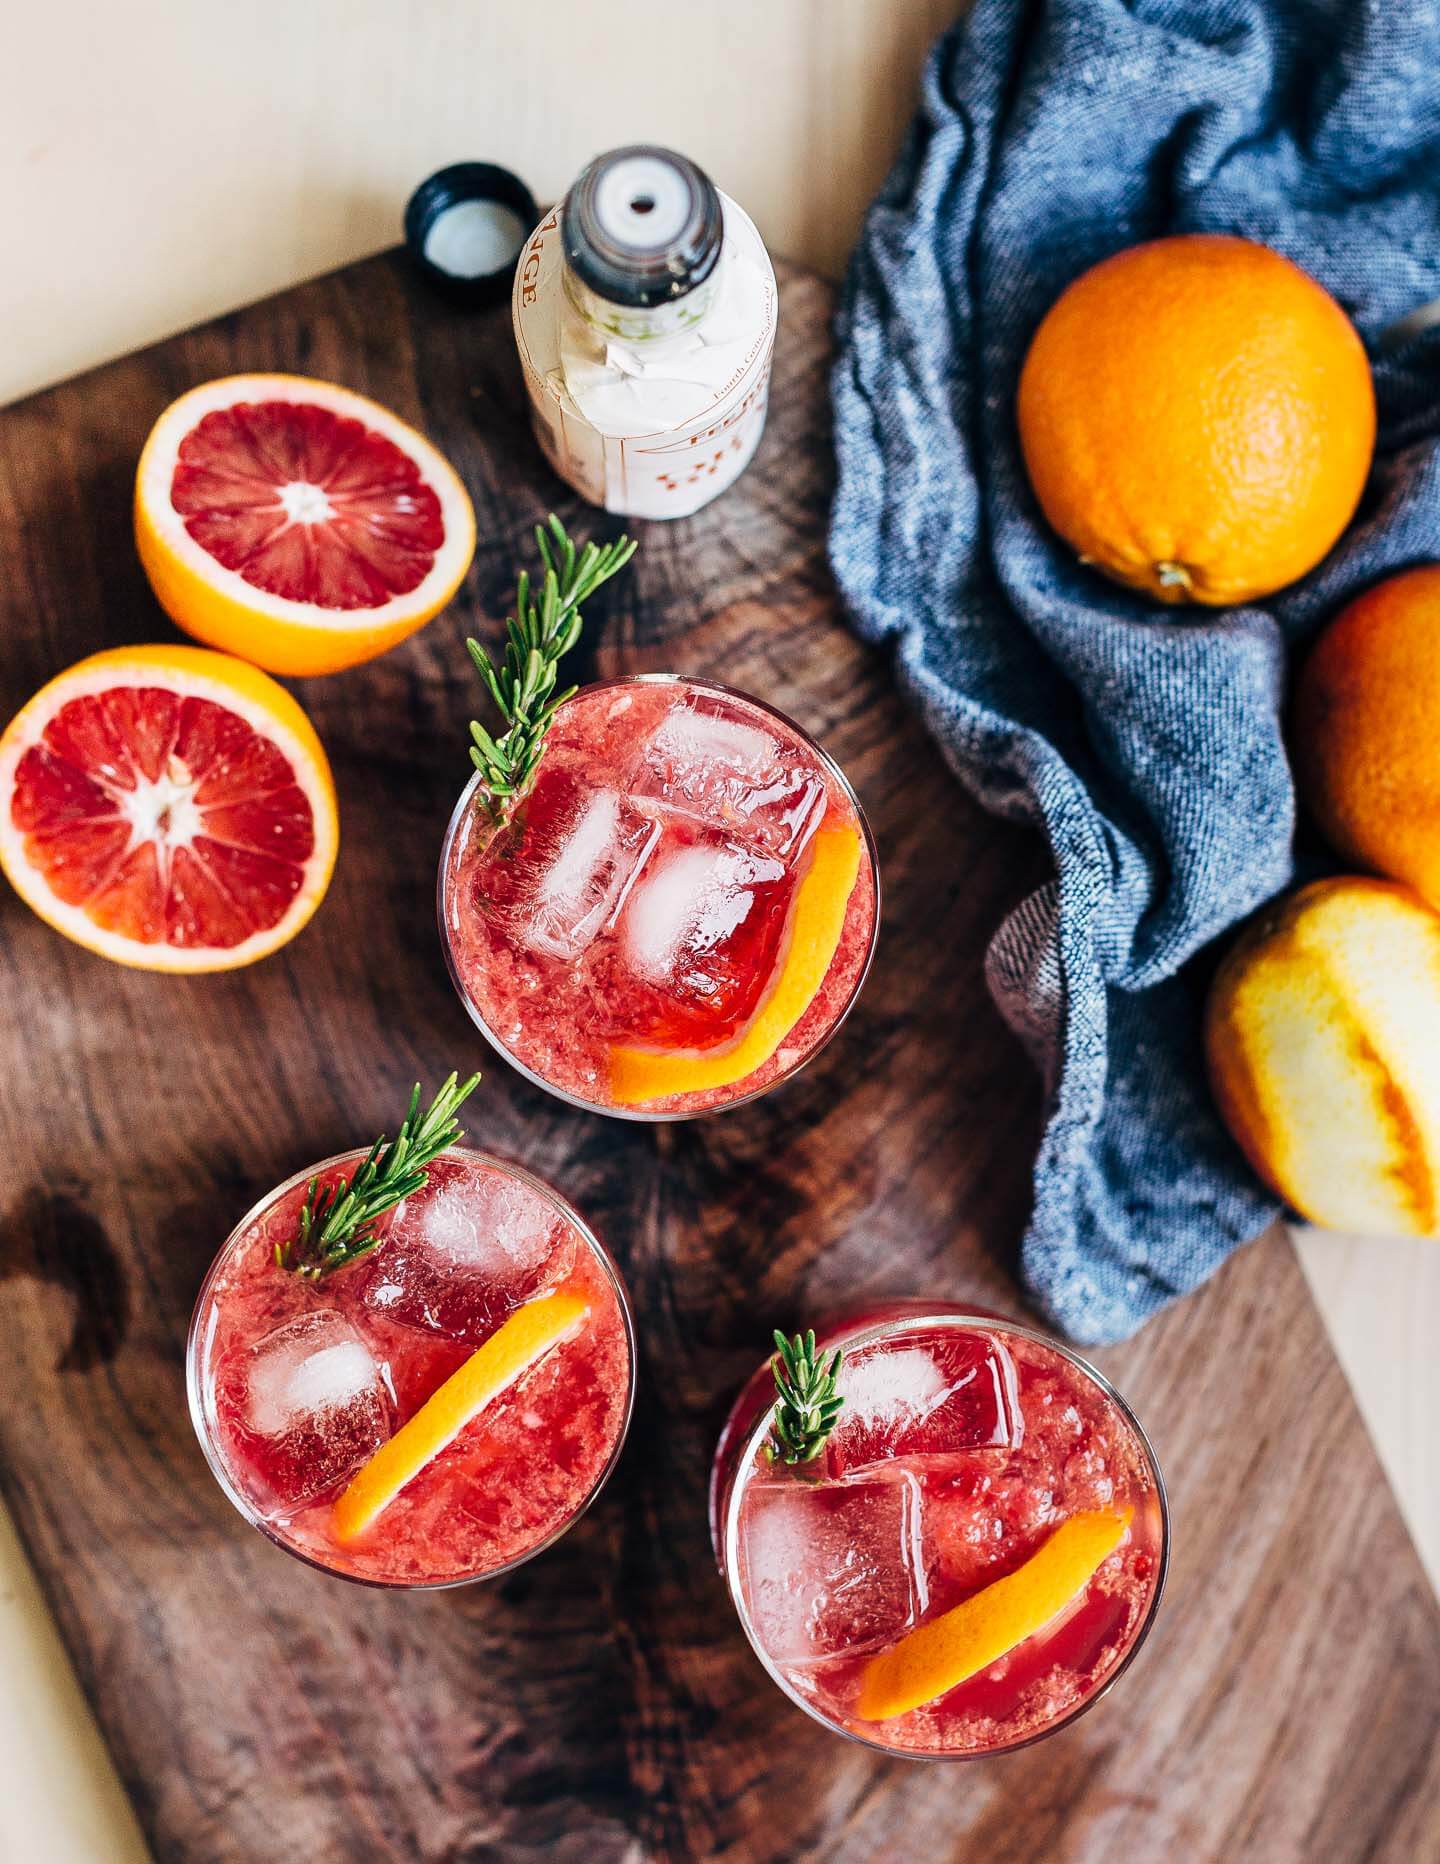 Non-alcoholic blood orange spritzers with a dash of orange bitters